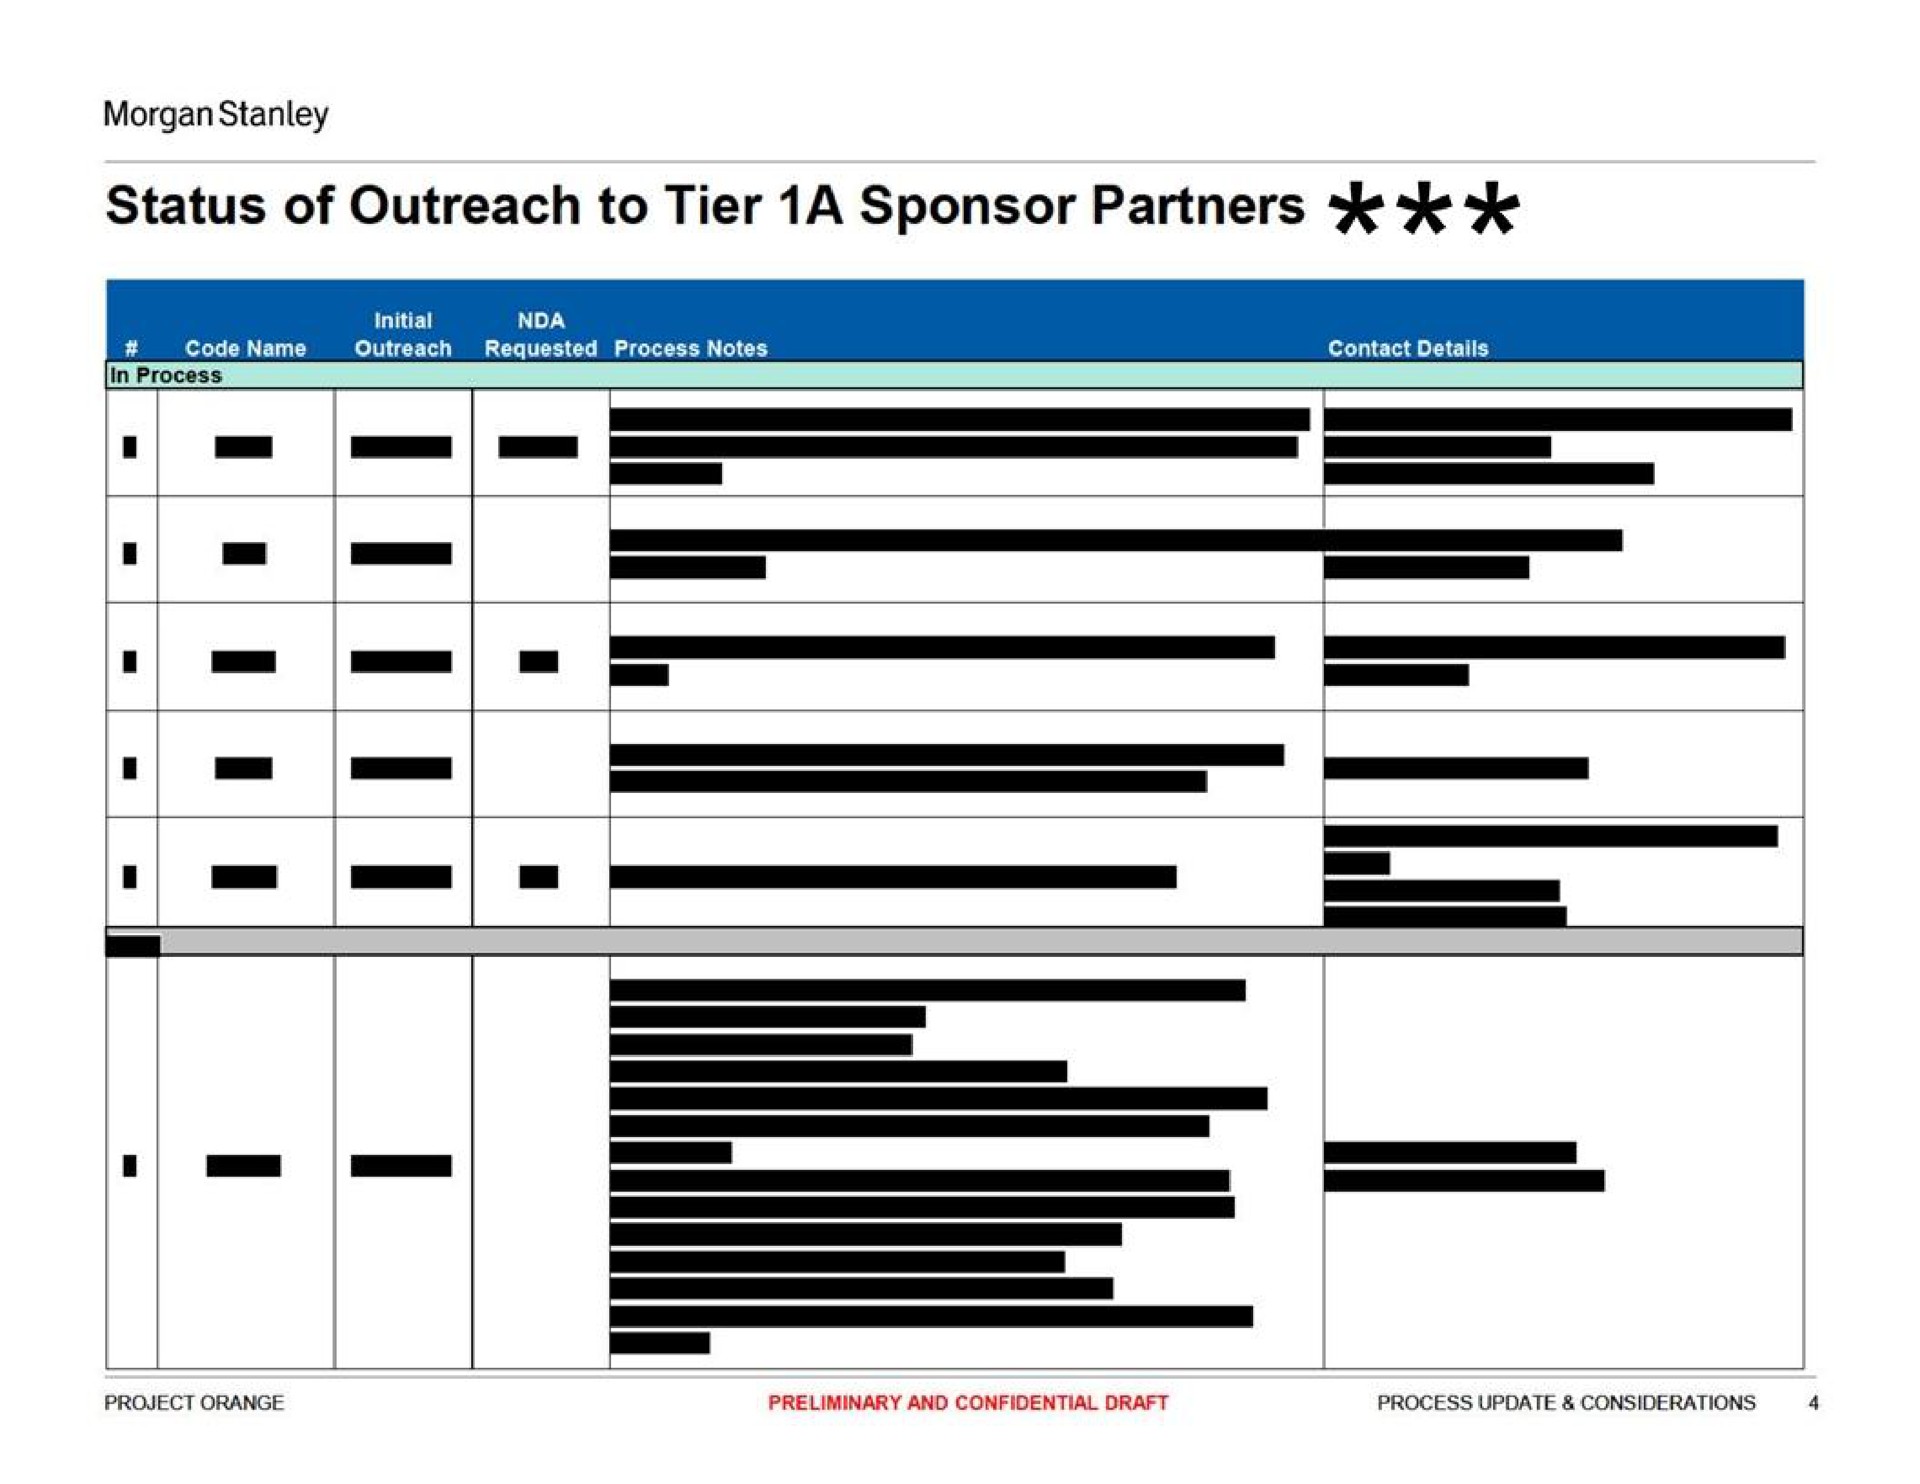 status of outreach to tier a sponsor partners | Morgan Stanley